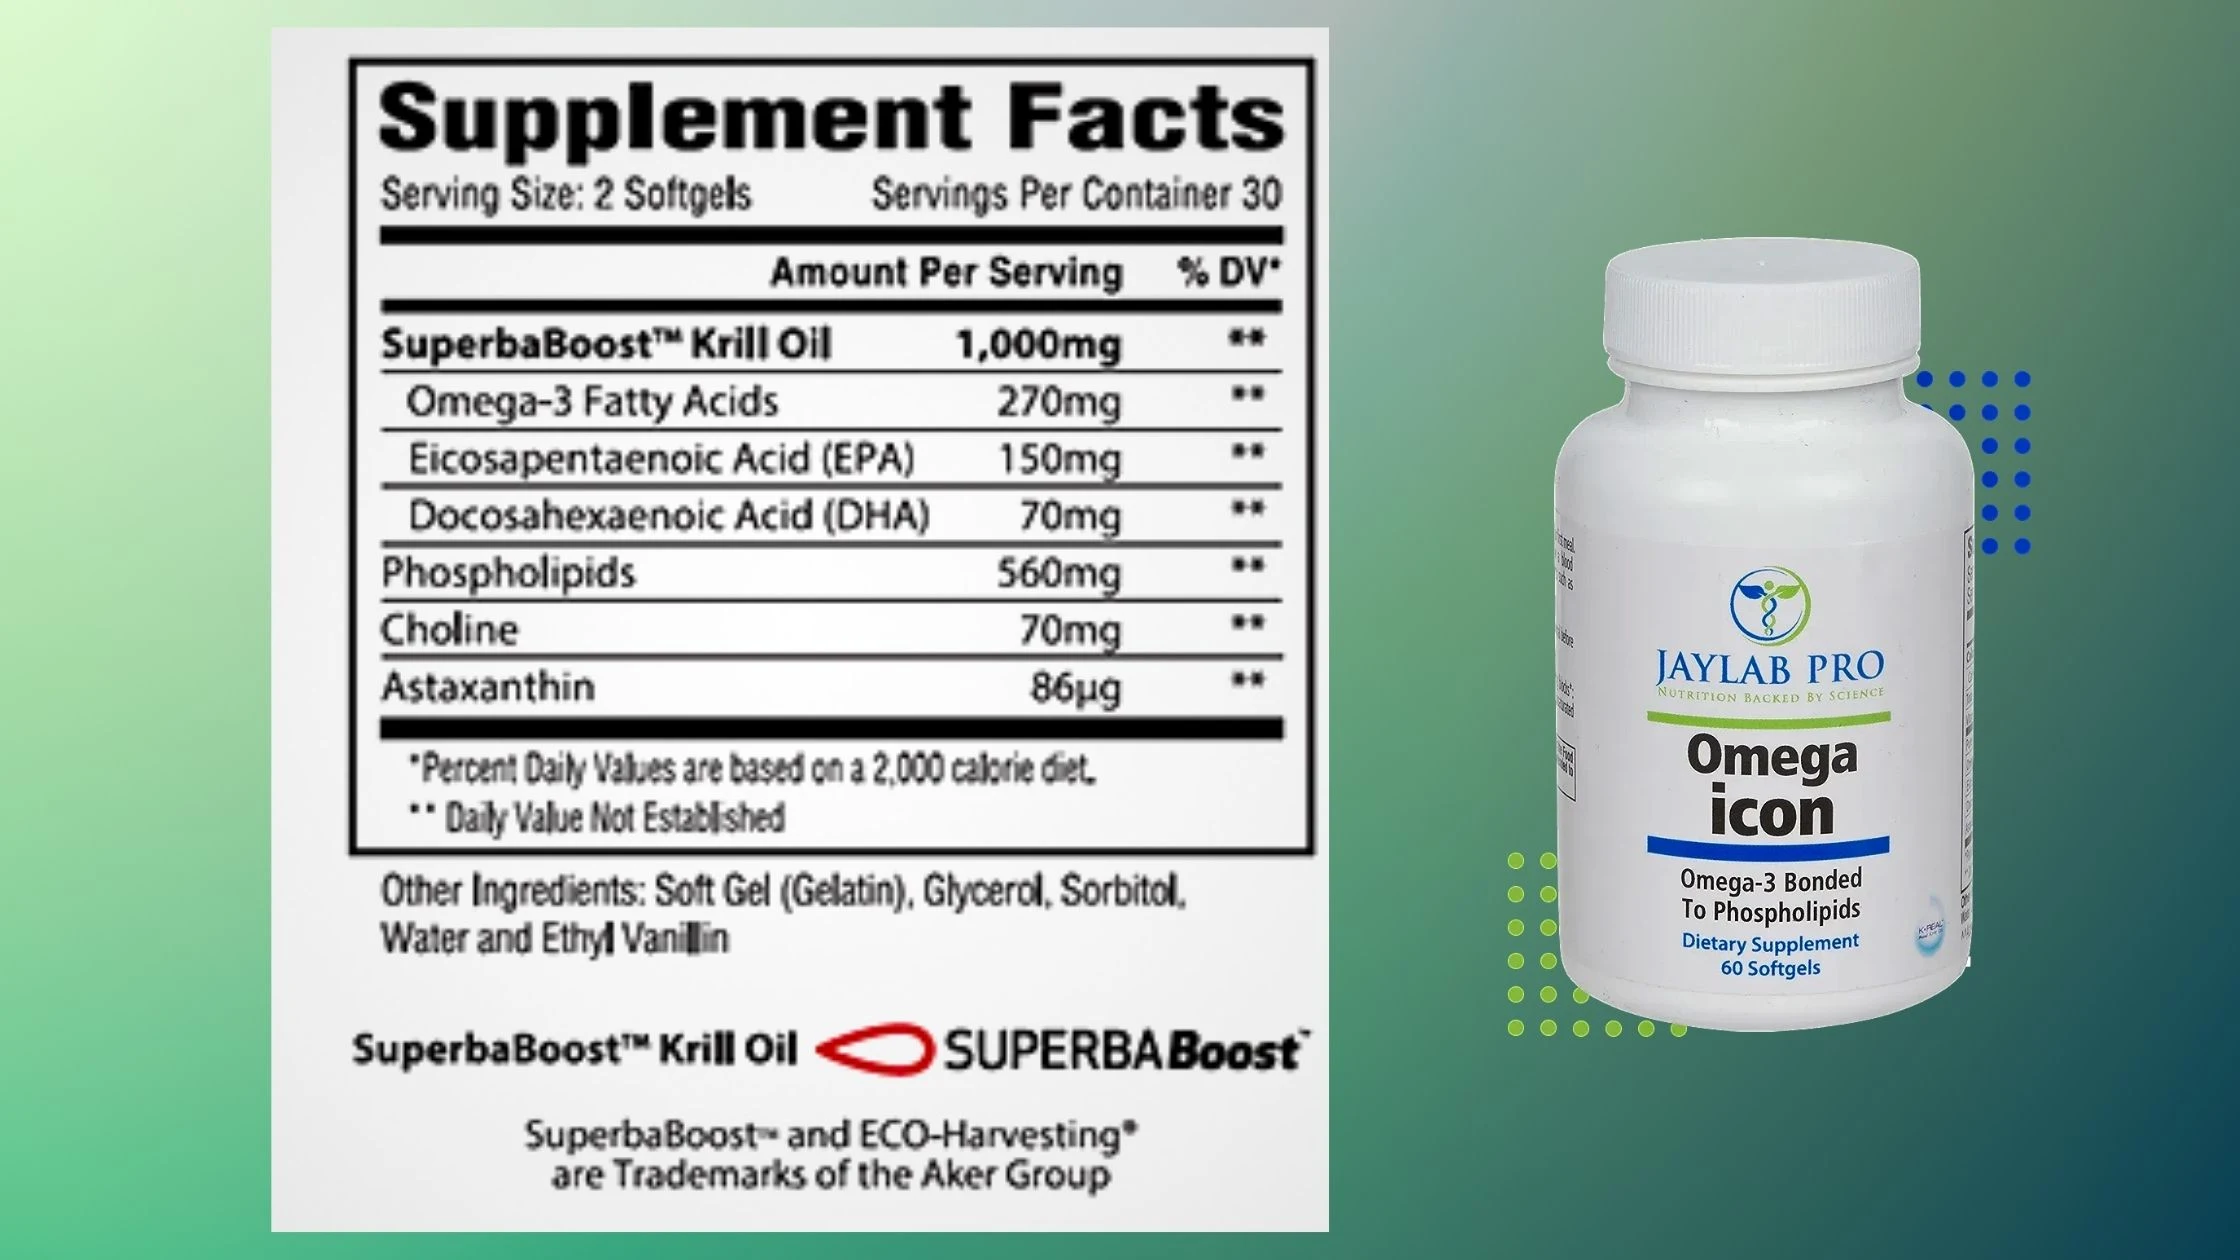 JayLab Pro Omega Icon supplement facts